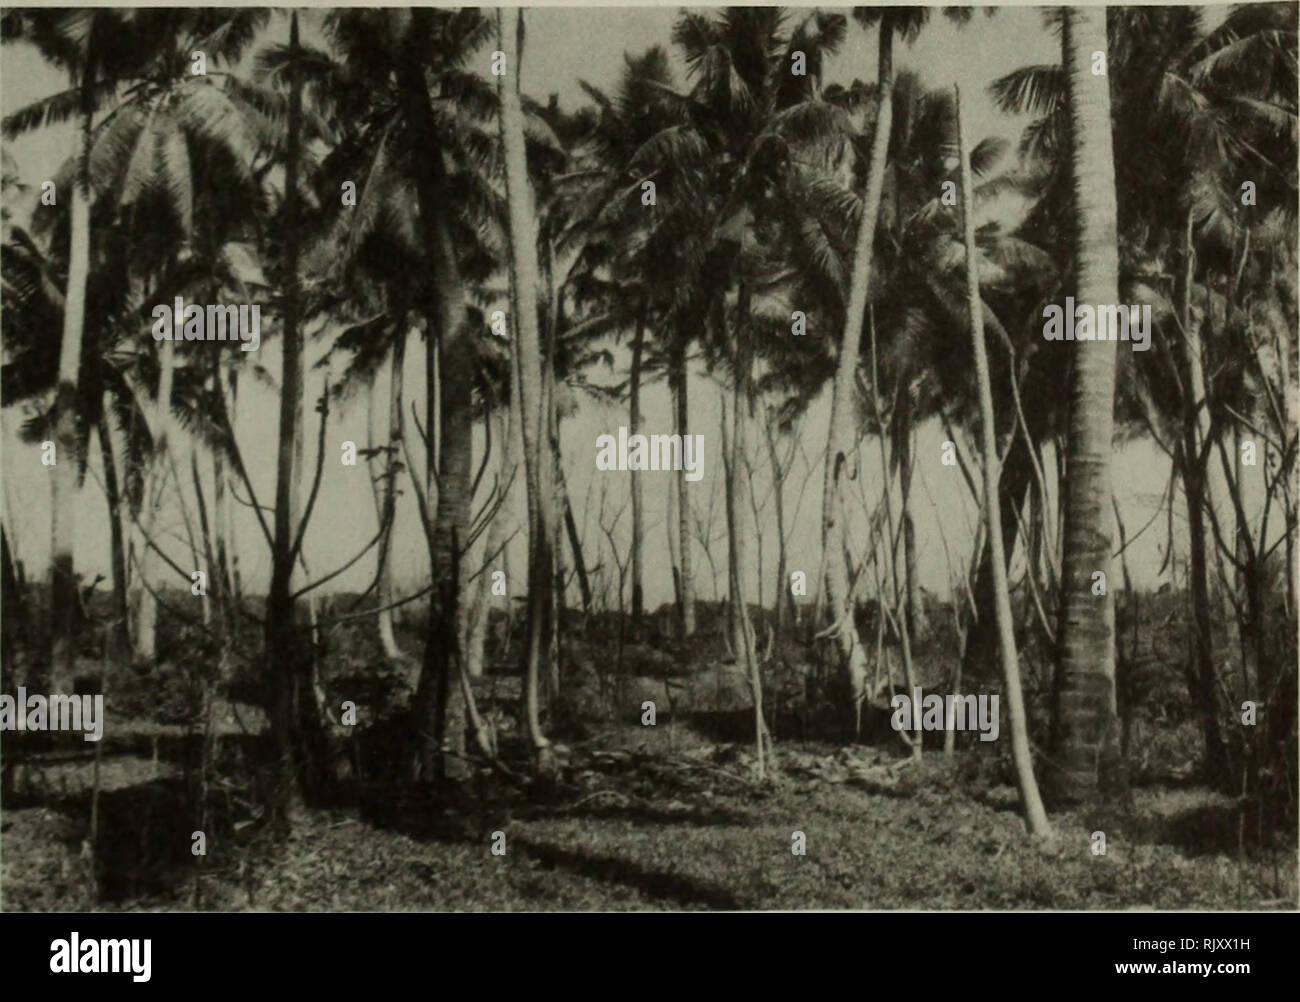 . Atoll research bulletin. Coral reefs and islands; Marine biology; Marine sciences. Plate 9. The narrow belt of Cordia subcordata and Thespesia populrea growing on phosphatic sandstone in Hirondelle Bay on the north-east coast. At Hirondelle Point (left of picture) tall Casuarina are used for roosting by Frigate birds. On the beach is a mat of Ipomoea pes-caprae extending out from the Cordia/Thespesia belt. Note the beach driftwood, the remains of Suriana maritima and Tournefortia argentea killed by the sea during the annual erosion cycle. In the foreground is a Green Turtle Chelonia mydas ne Stock Photo